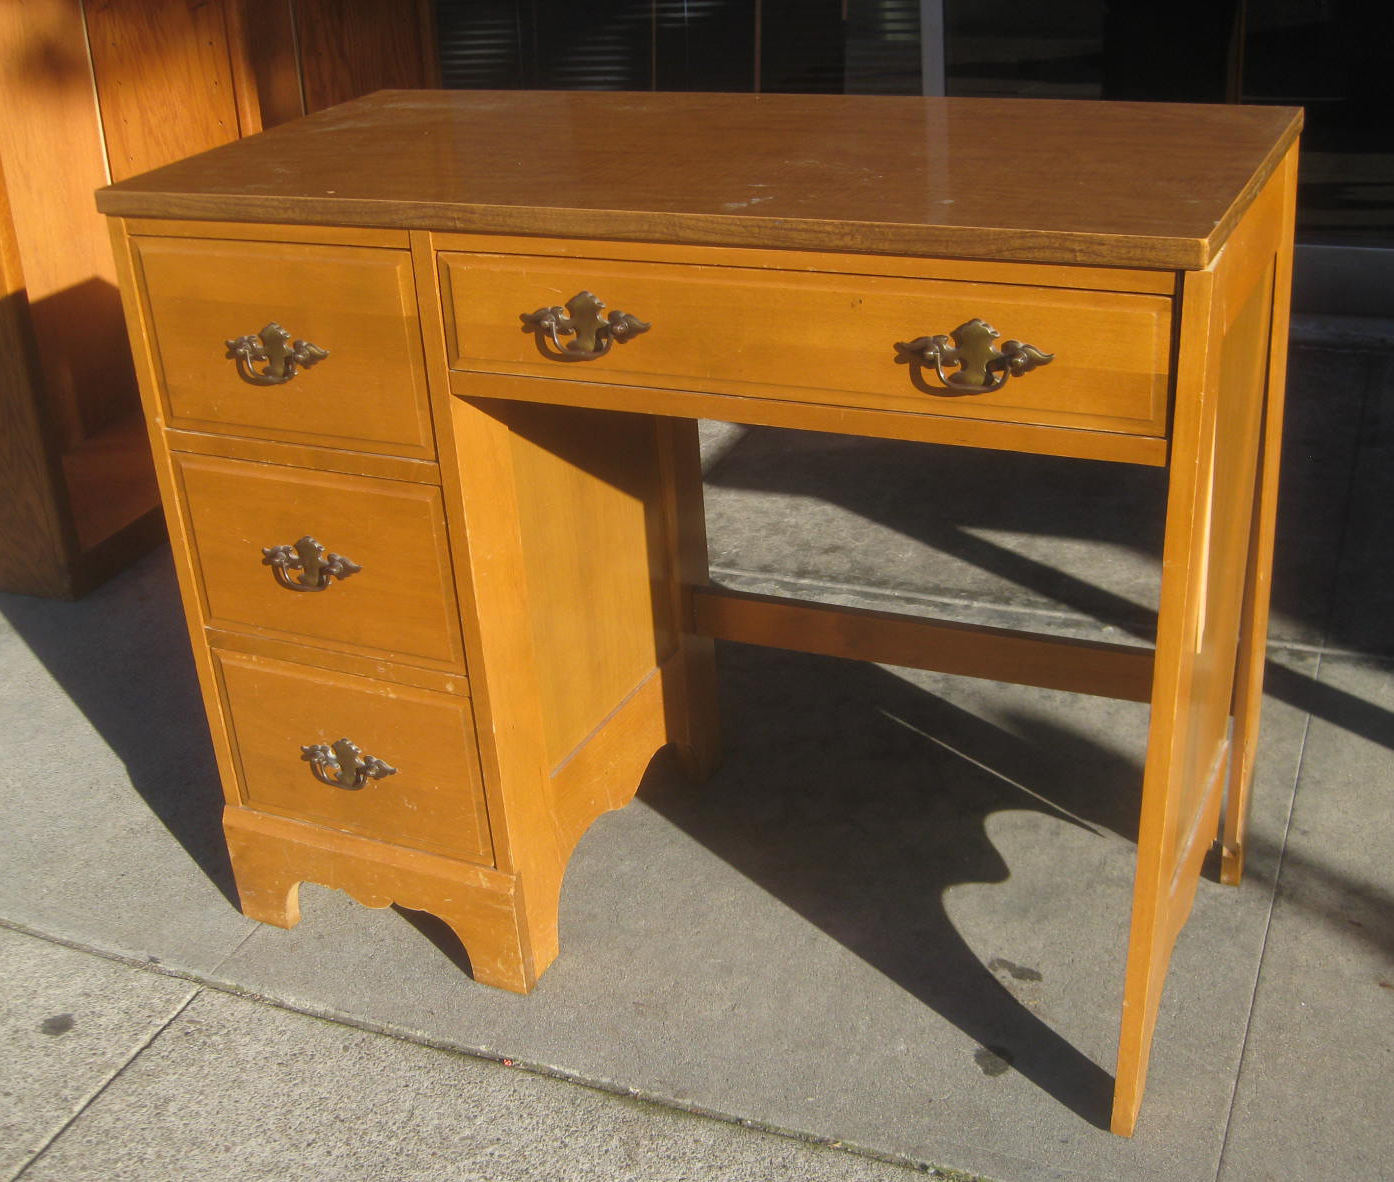 UHURU FURNITURE & COLLECTIBLES: SOLD - Small Wooden Desk - $40